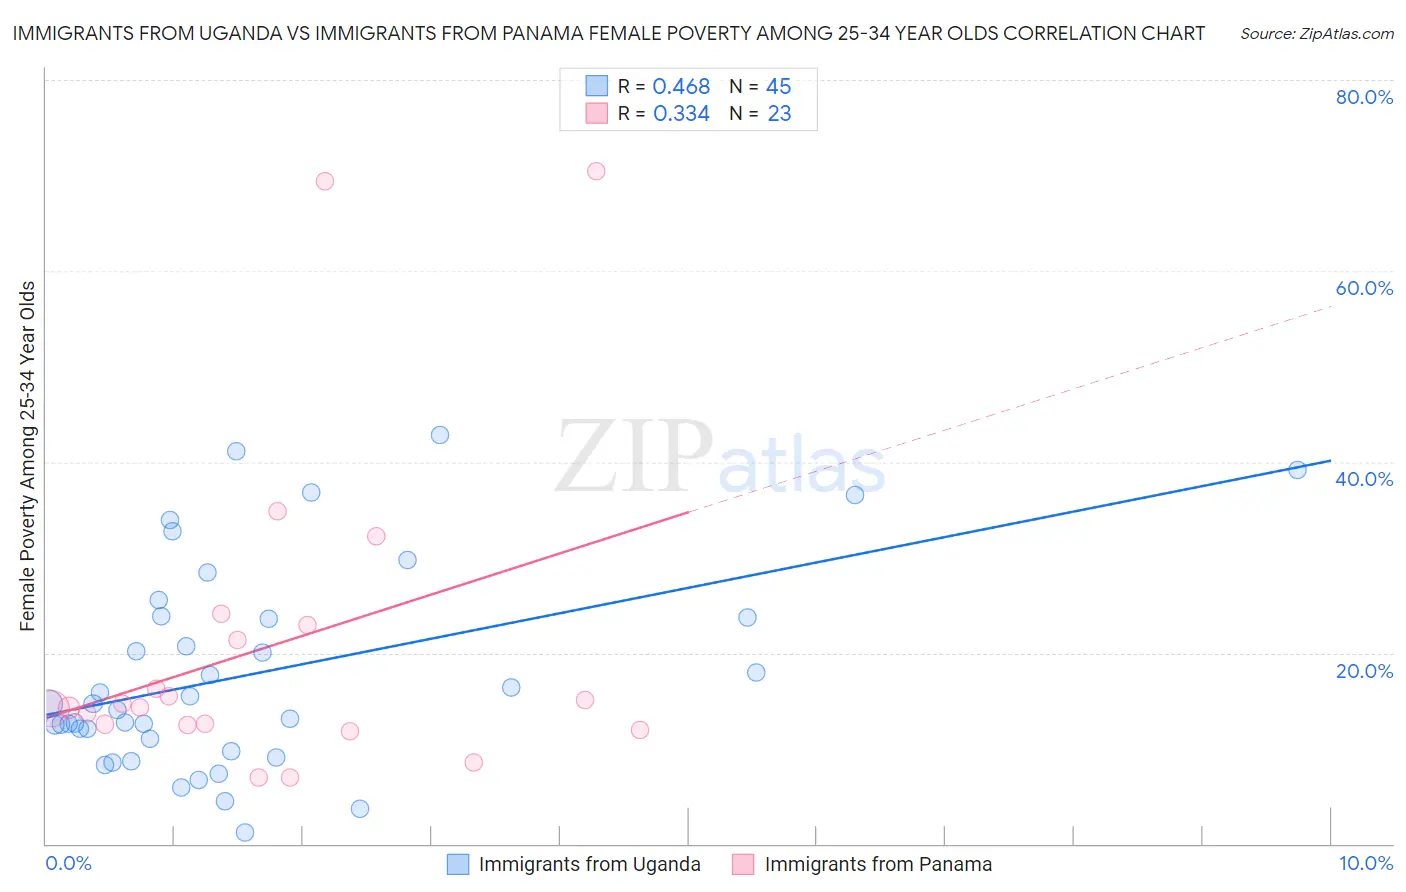 Immigrants from Uganda vs Immigrants from Panama Female Poverty Among 25-34 Year Olds